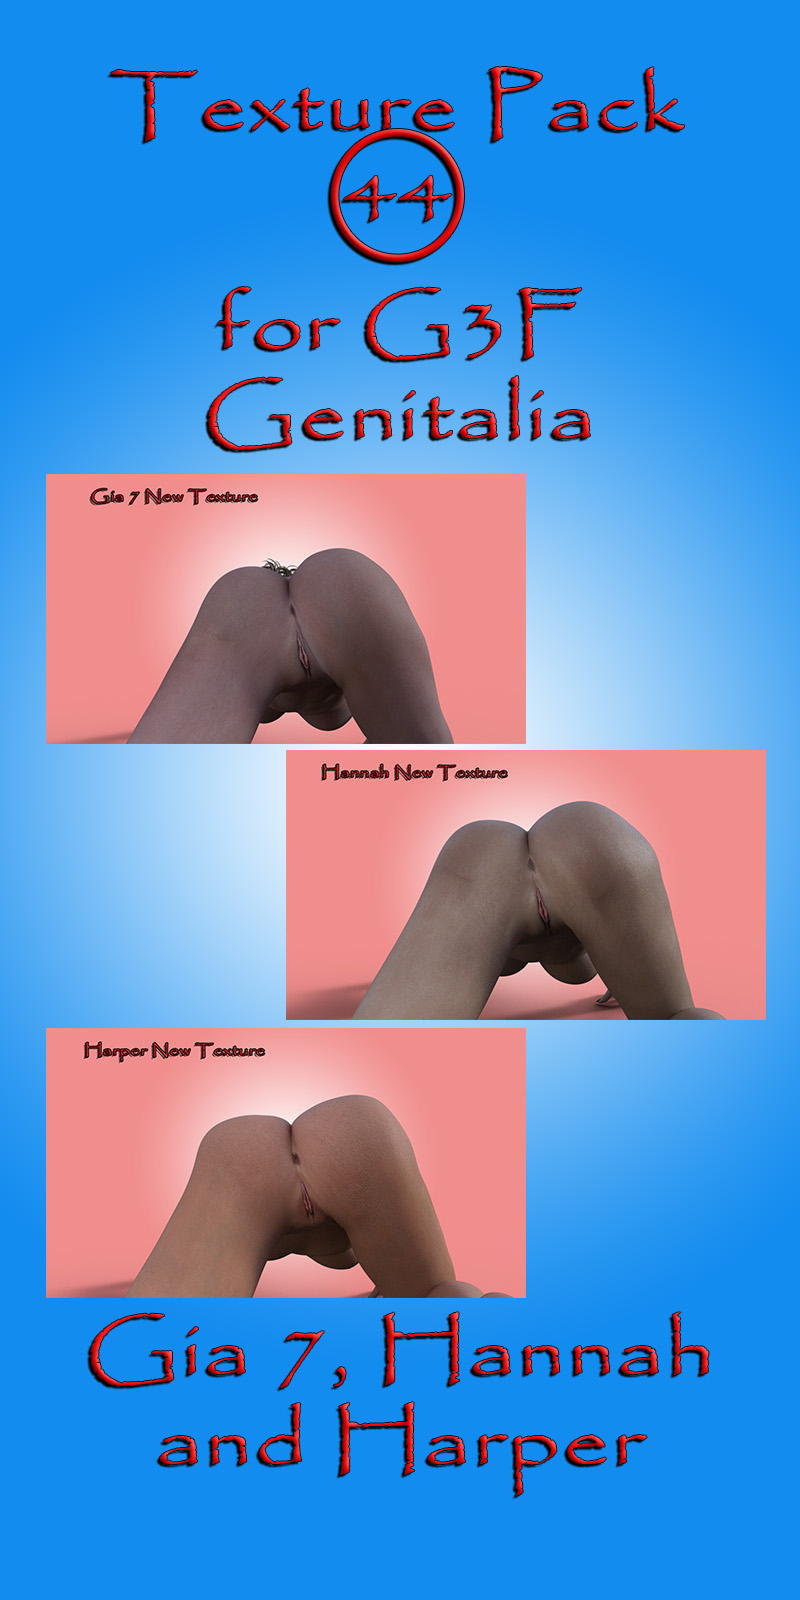 Iray Texture Pack 44 For G3F Genitalia